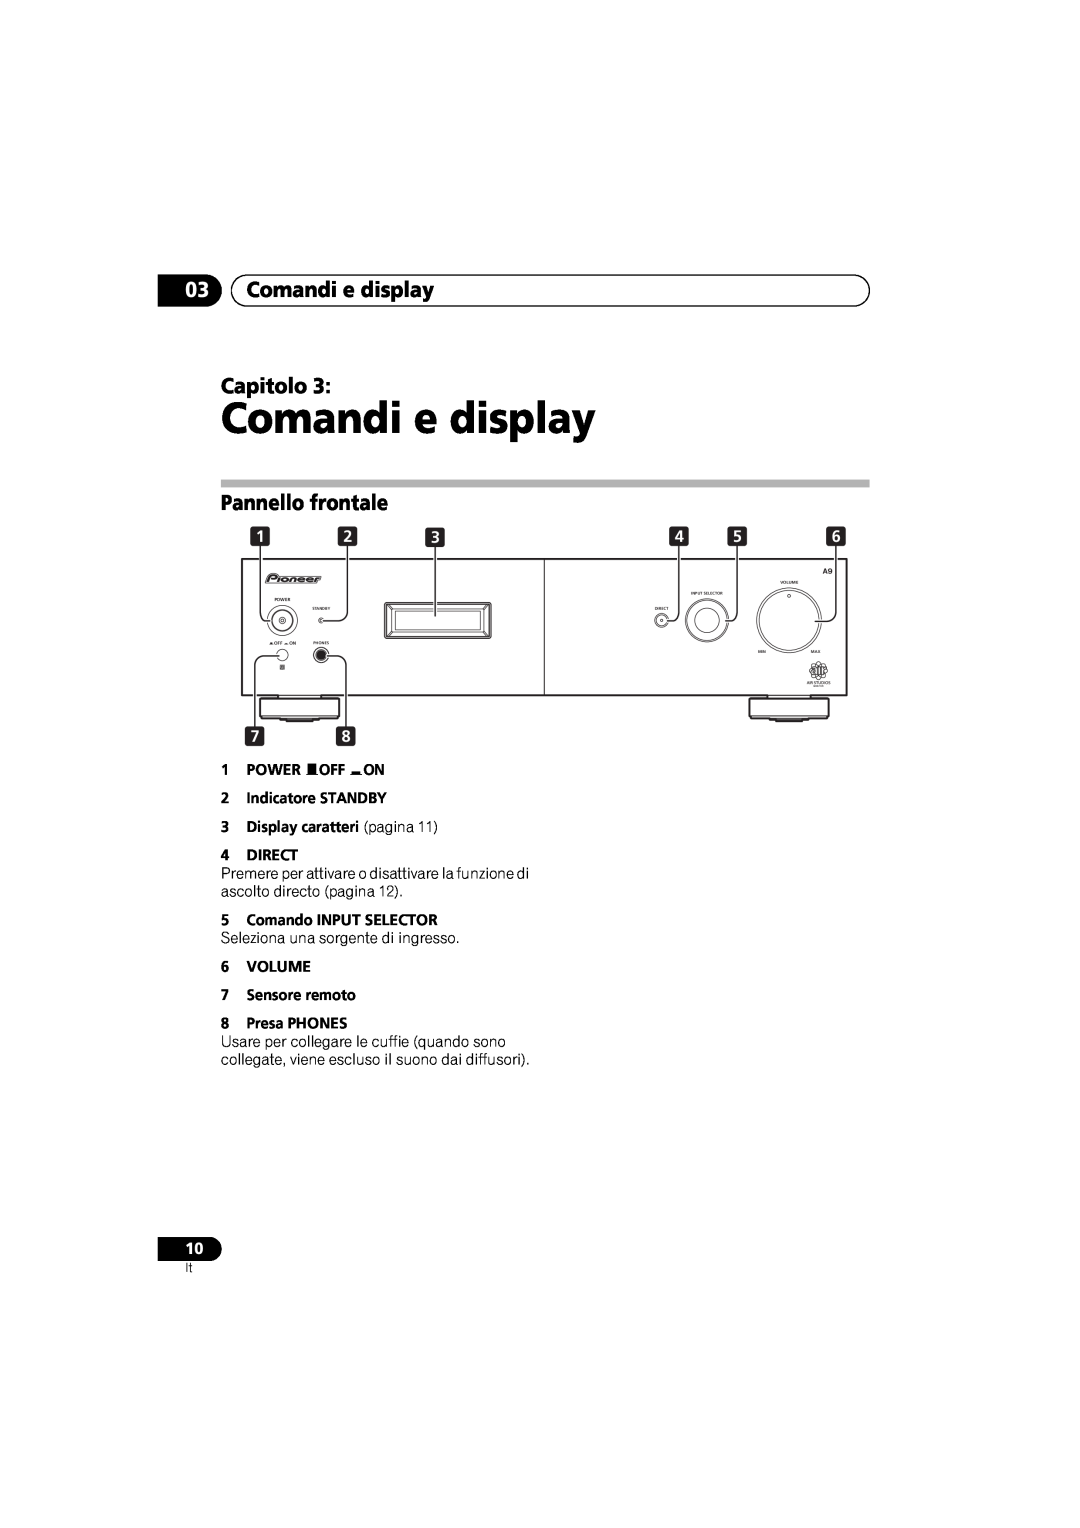 Pioneer A-A9-J manual 03Comandi e display Capitolo, Pannello frontale, 1POWER OFF ON 2Indicatore STANDBY 